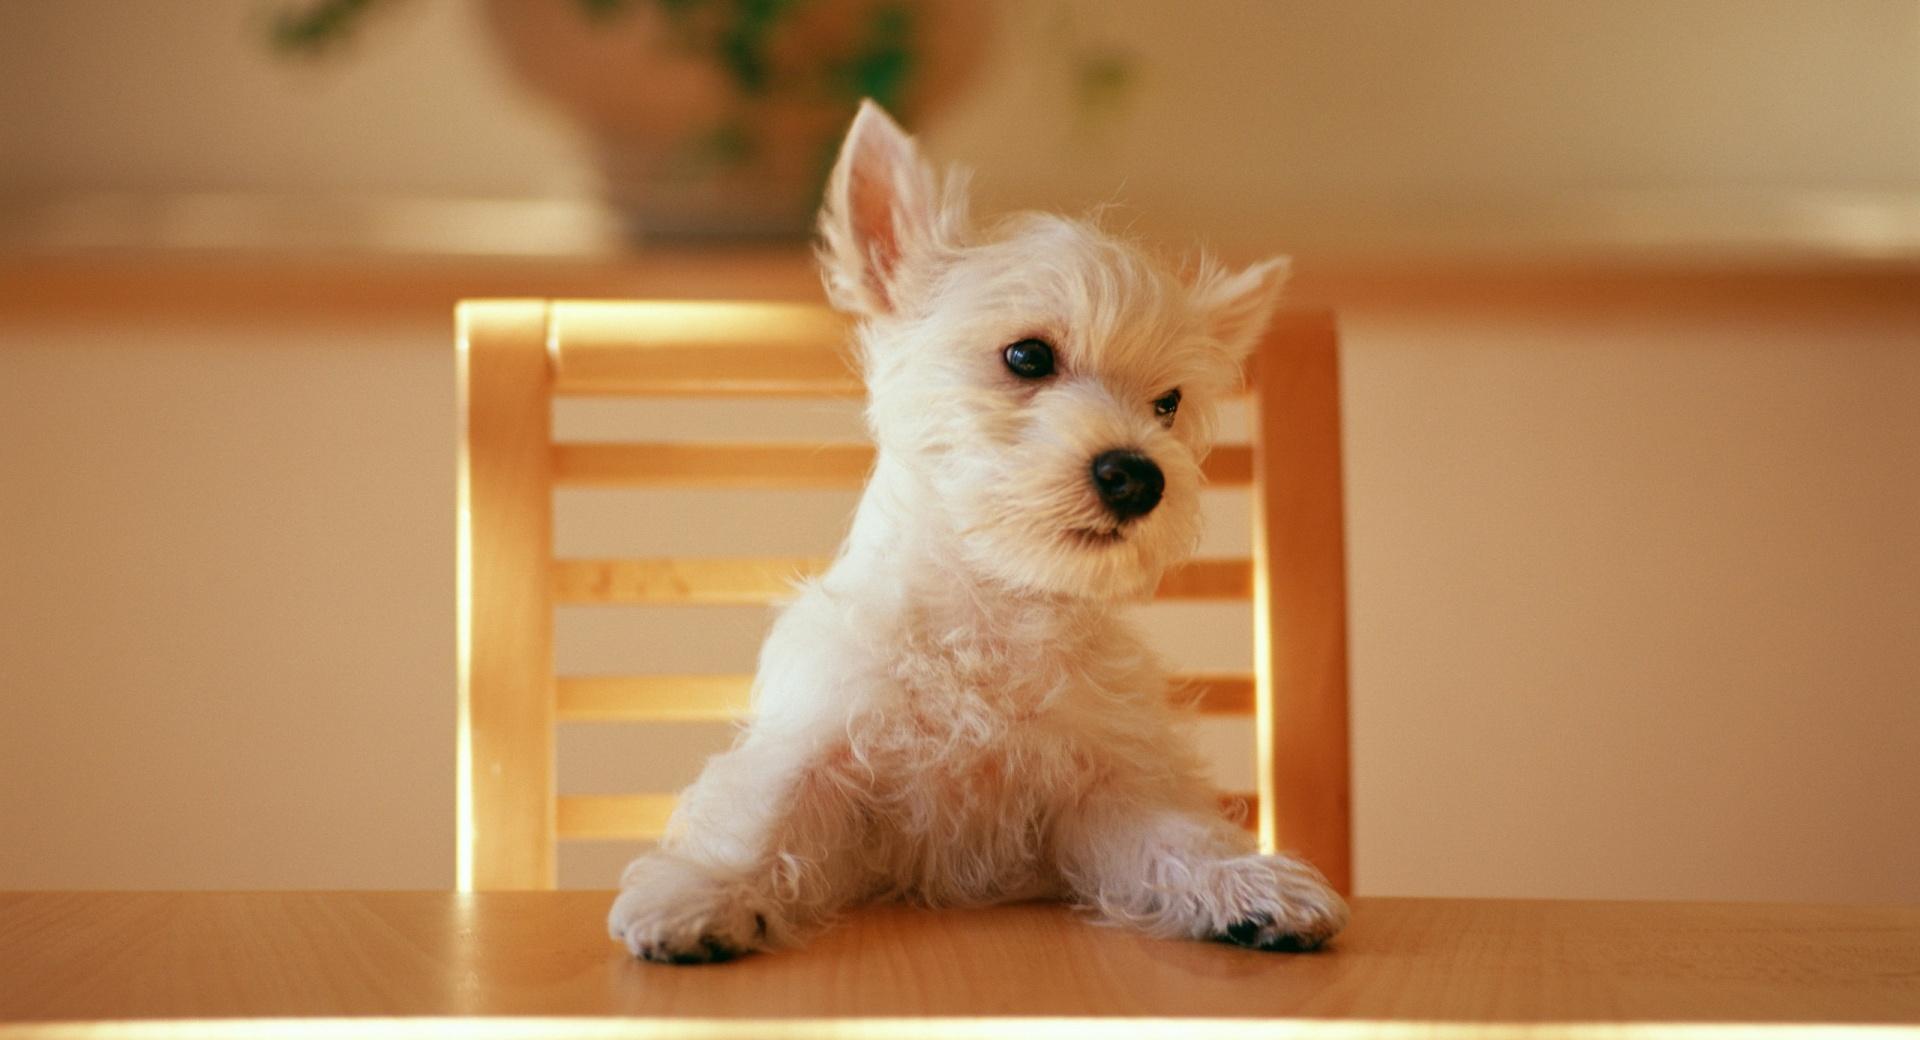 Dog Sitting On A Chair At The Table wallpapers HD quality